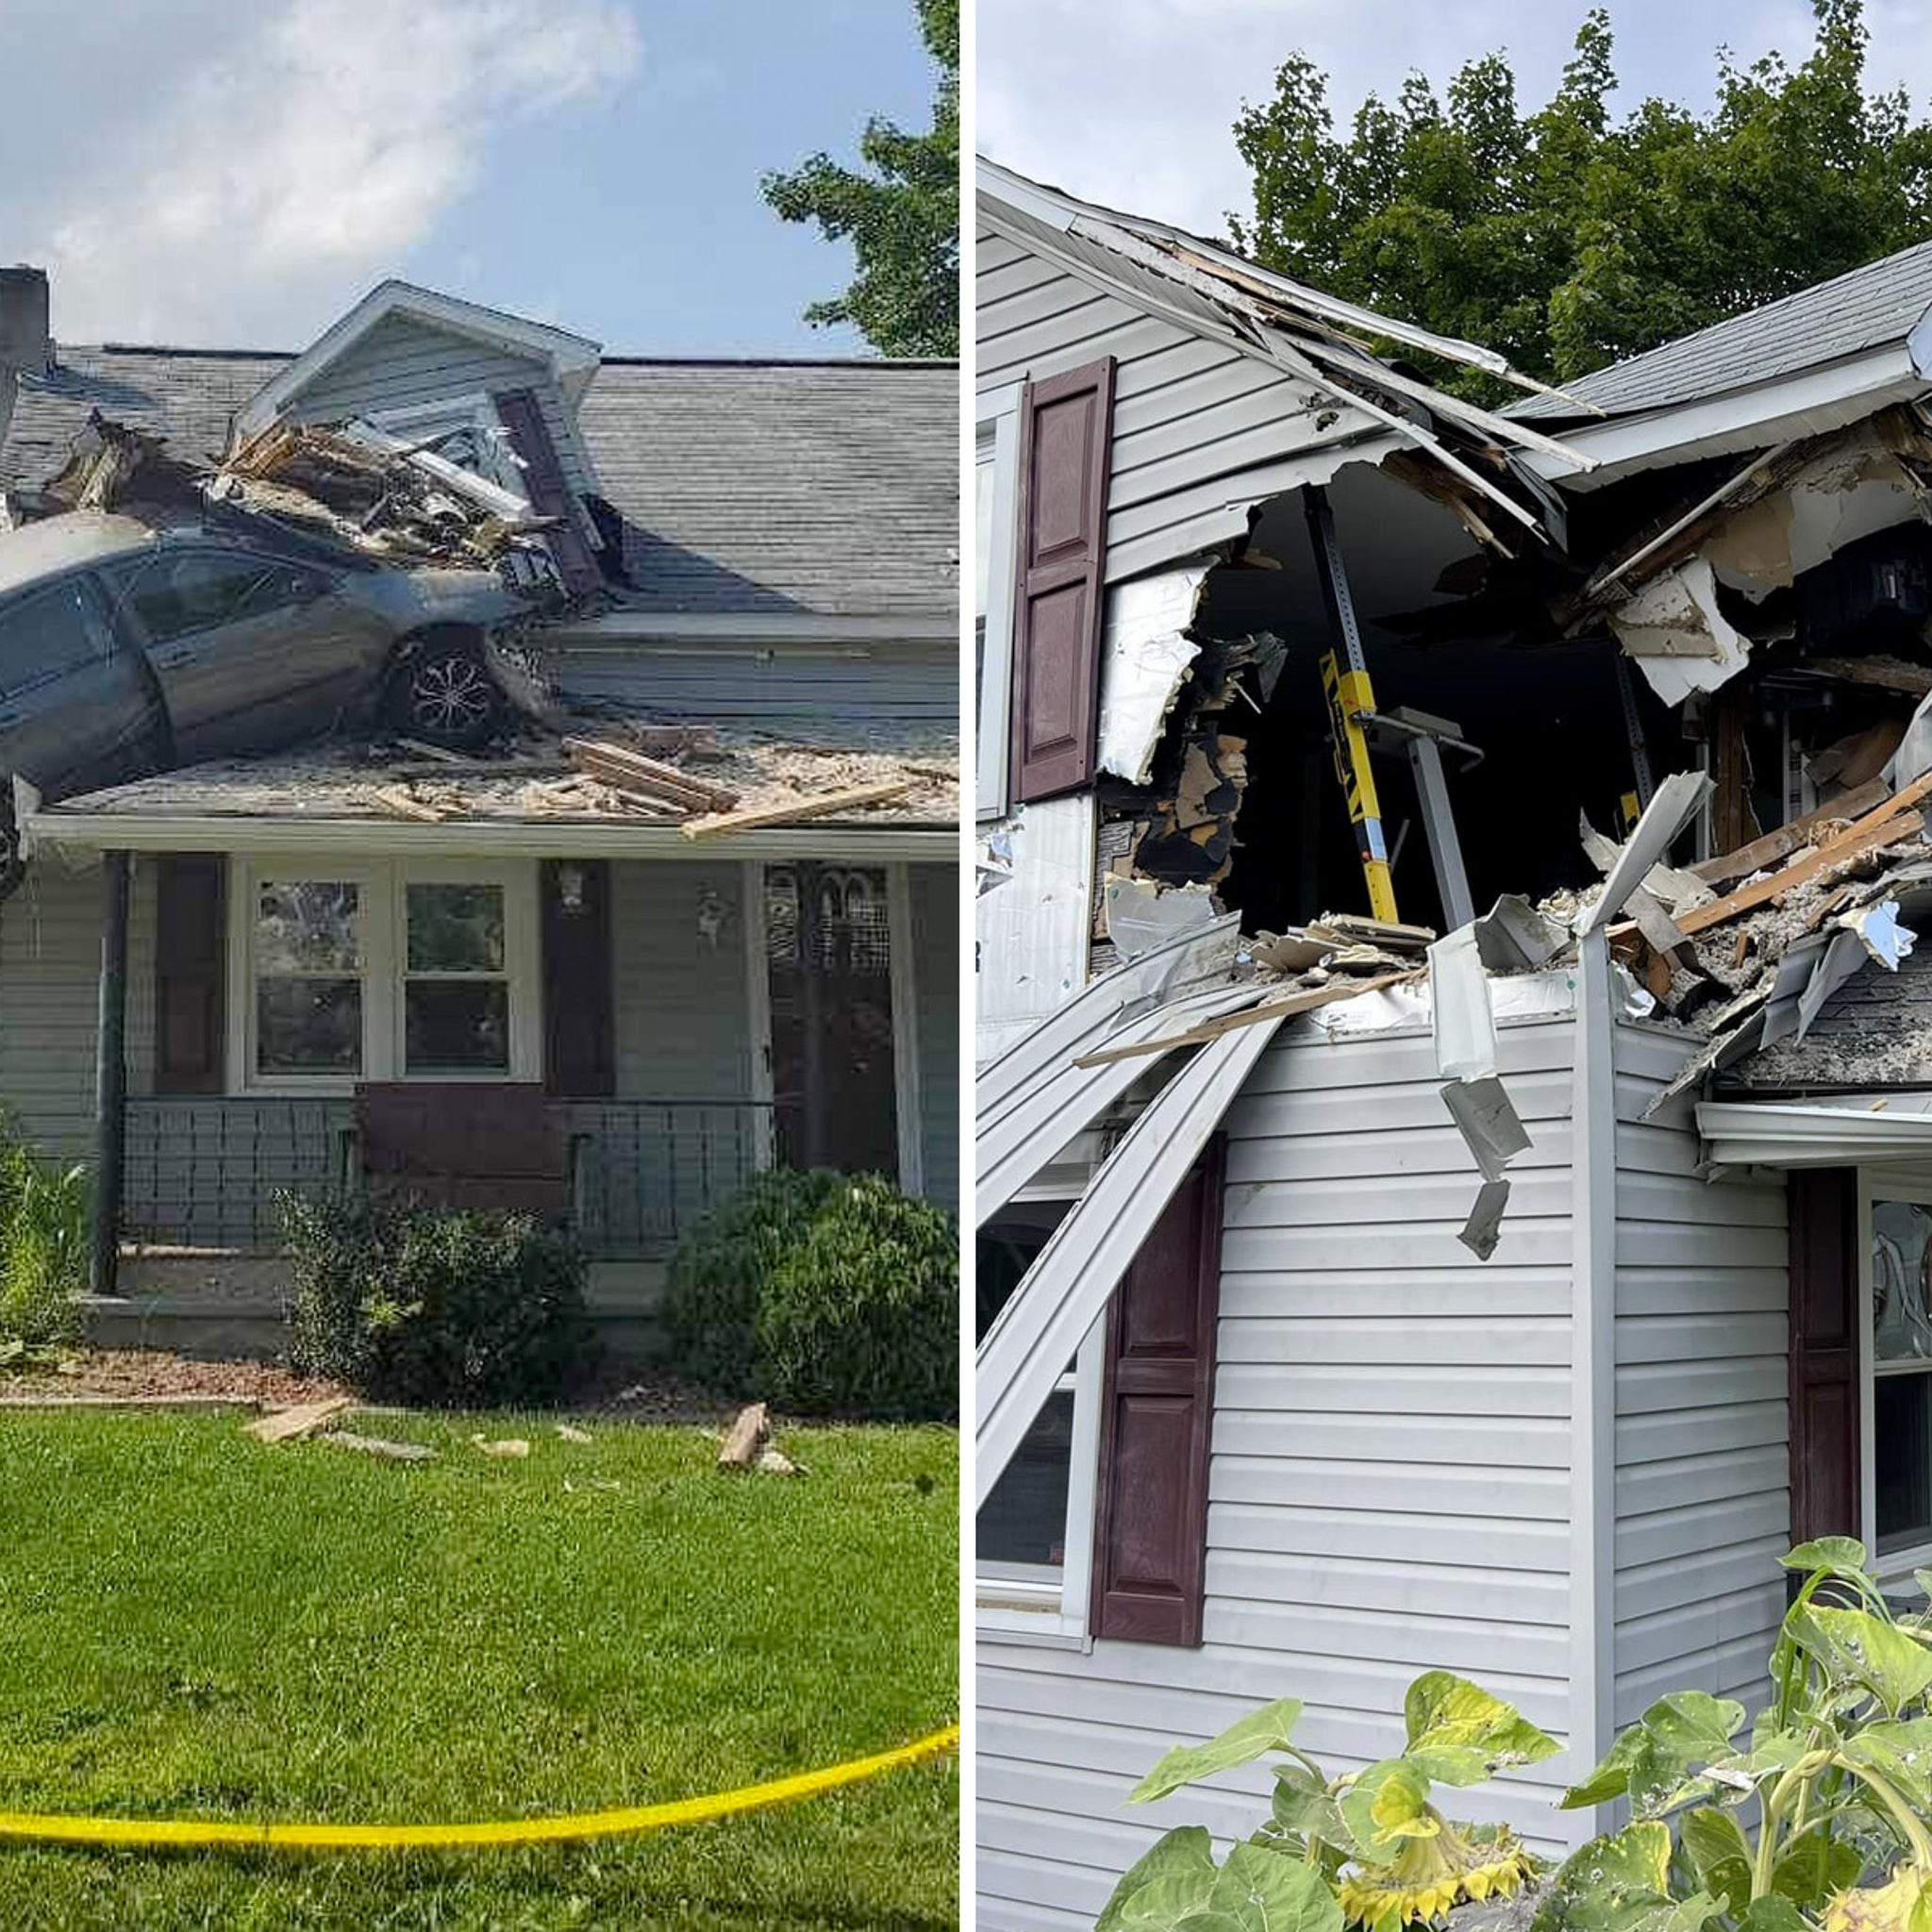 Car crashes into second floor of Pennsylvania home in 'intentional act,'  police say - The Washington Post